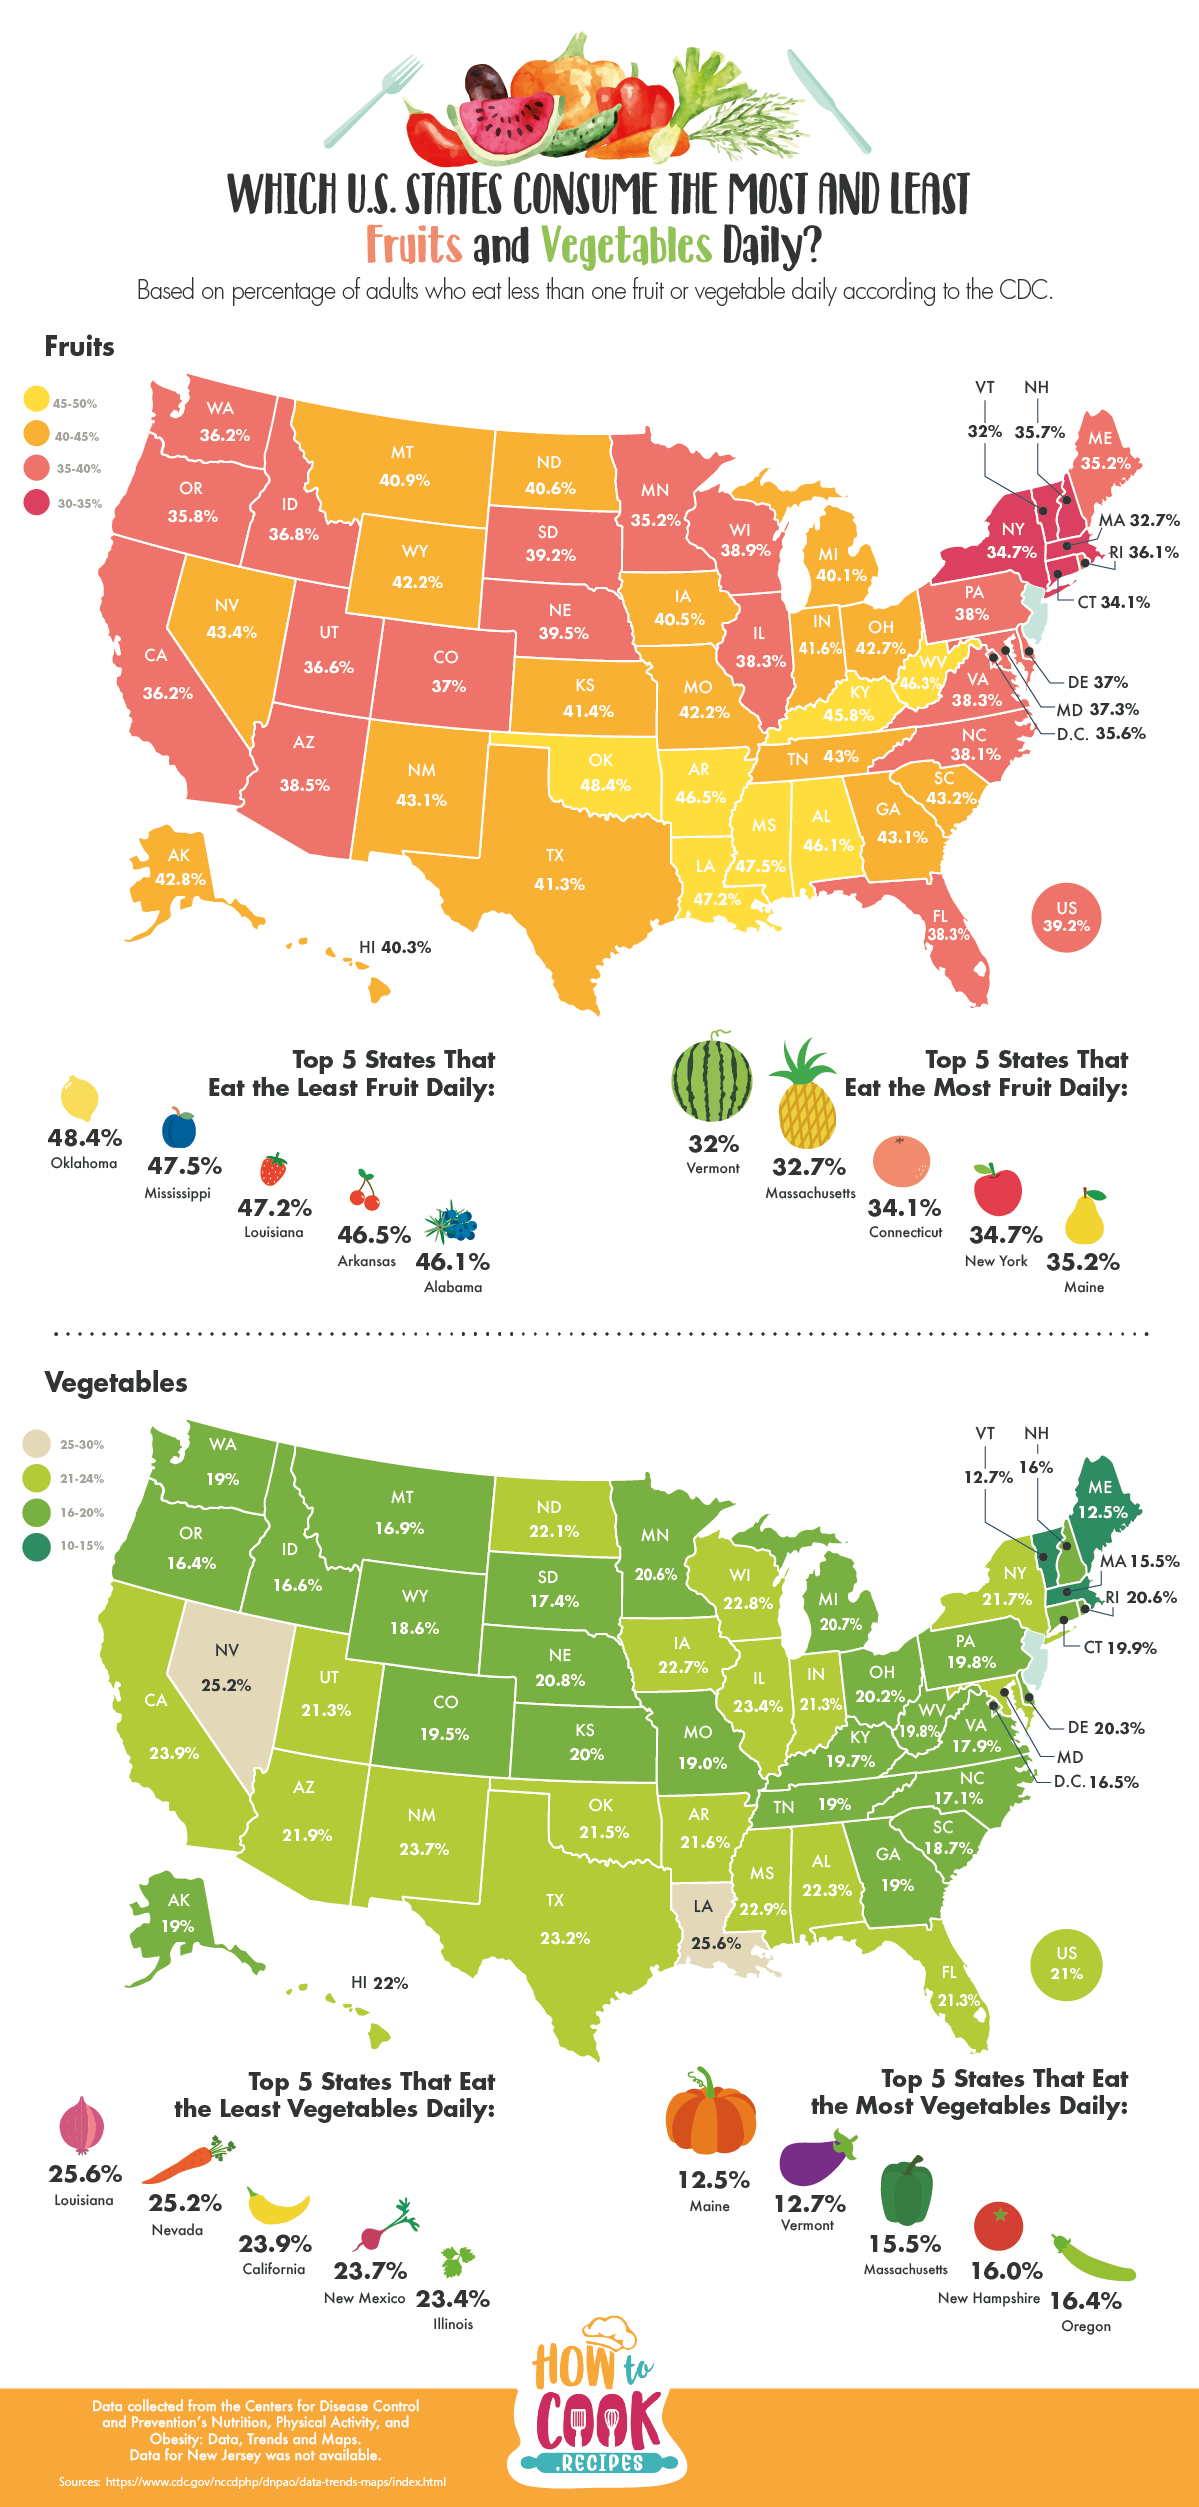 Which U.S. States Consume the Most and Least Fruits and Vegetables Daily